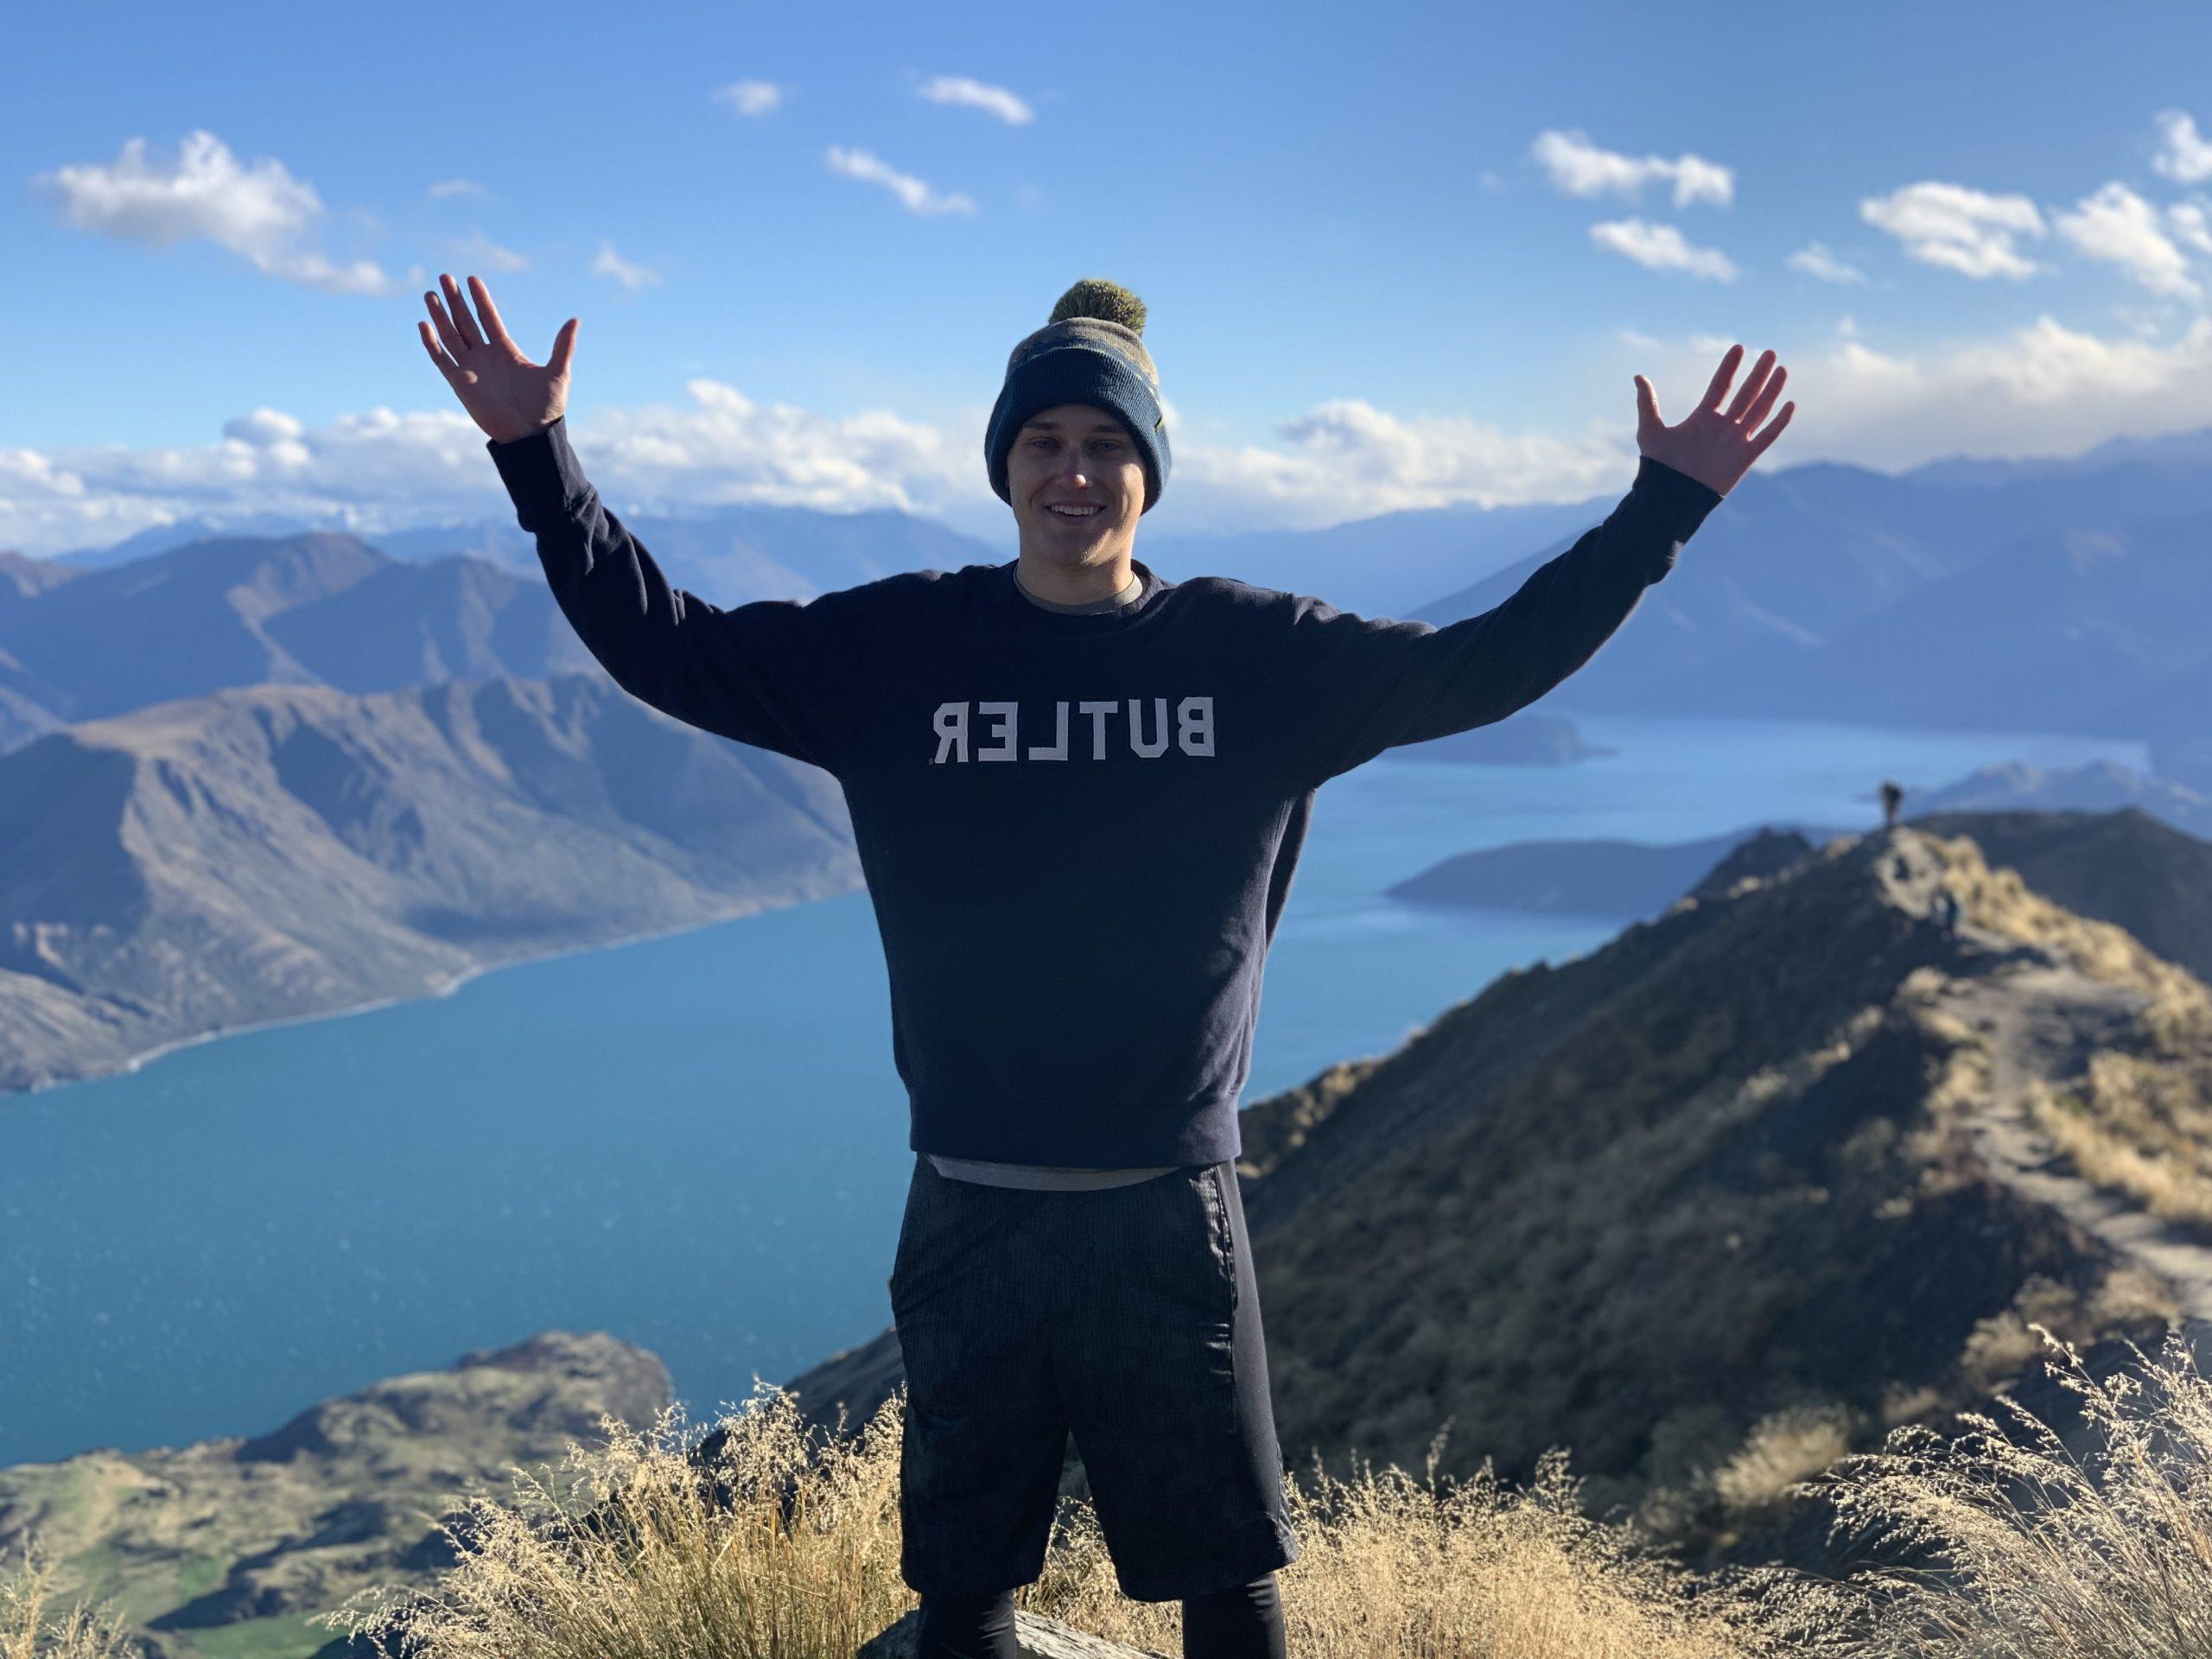 Roy Peak on top of a mountain in New Zealand